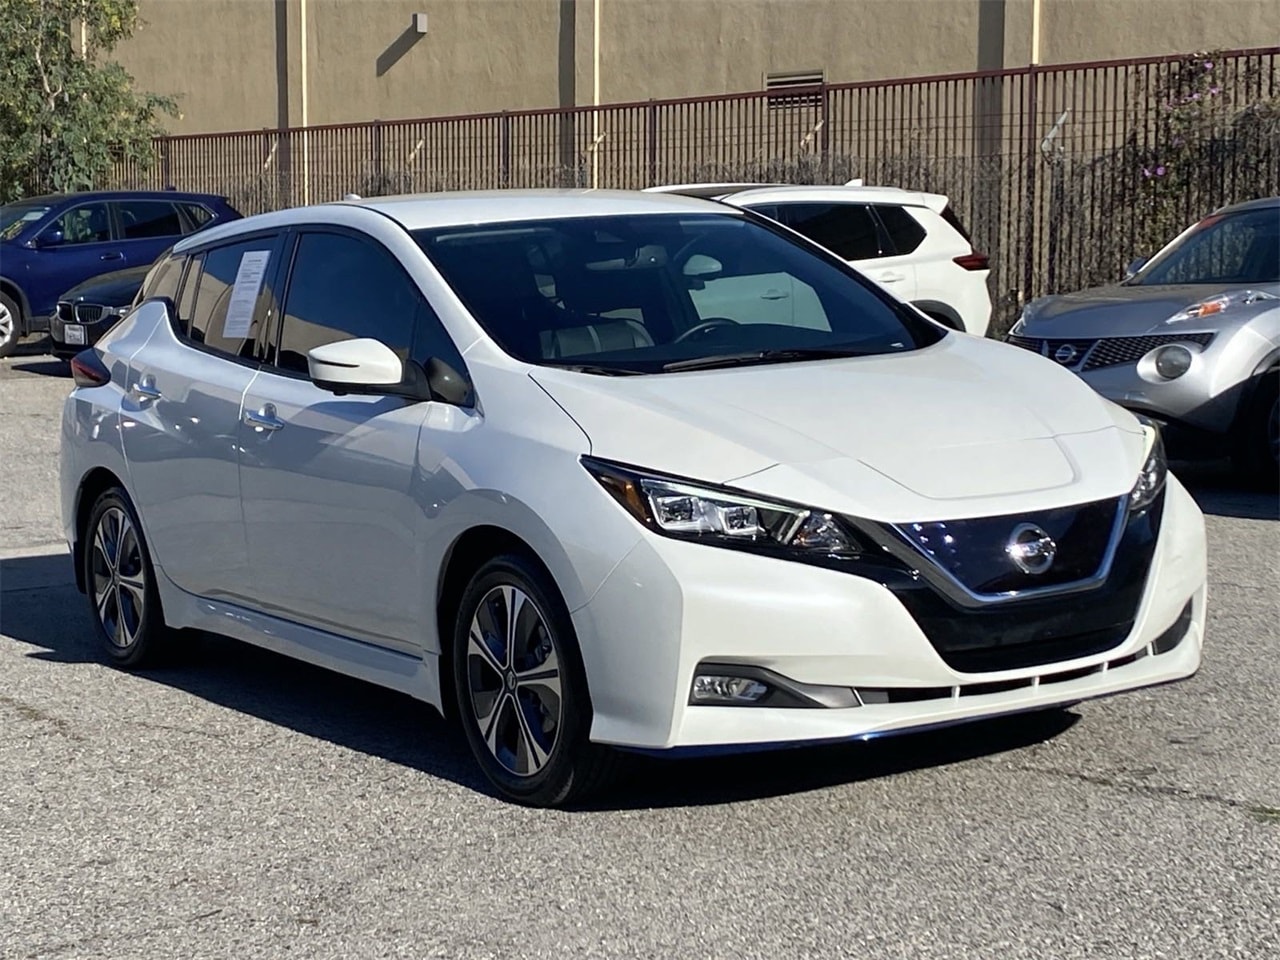 Used 2020 Nissan Leaf SL Plus with VIN 1N4BZ1DP9LC311396 for sale in Cerritos, CA